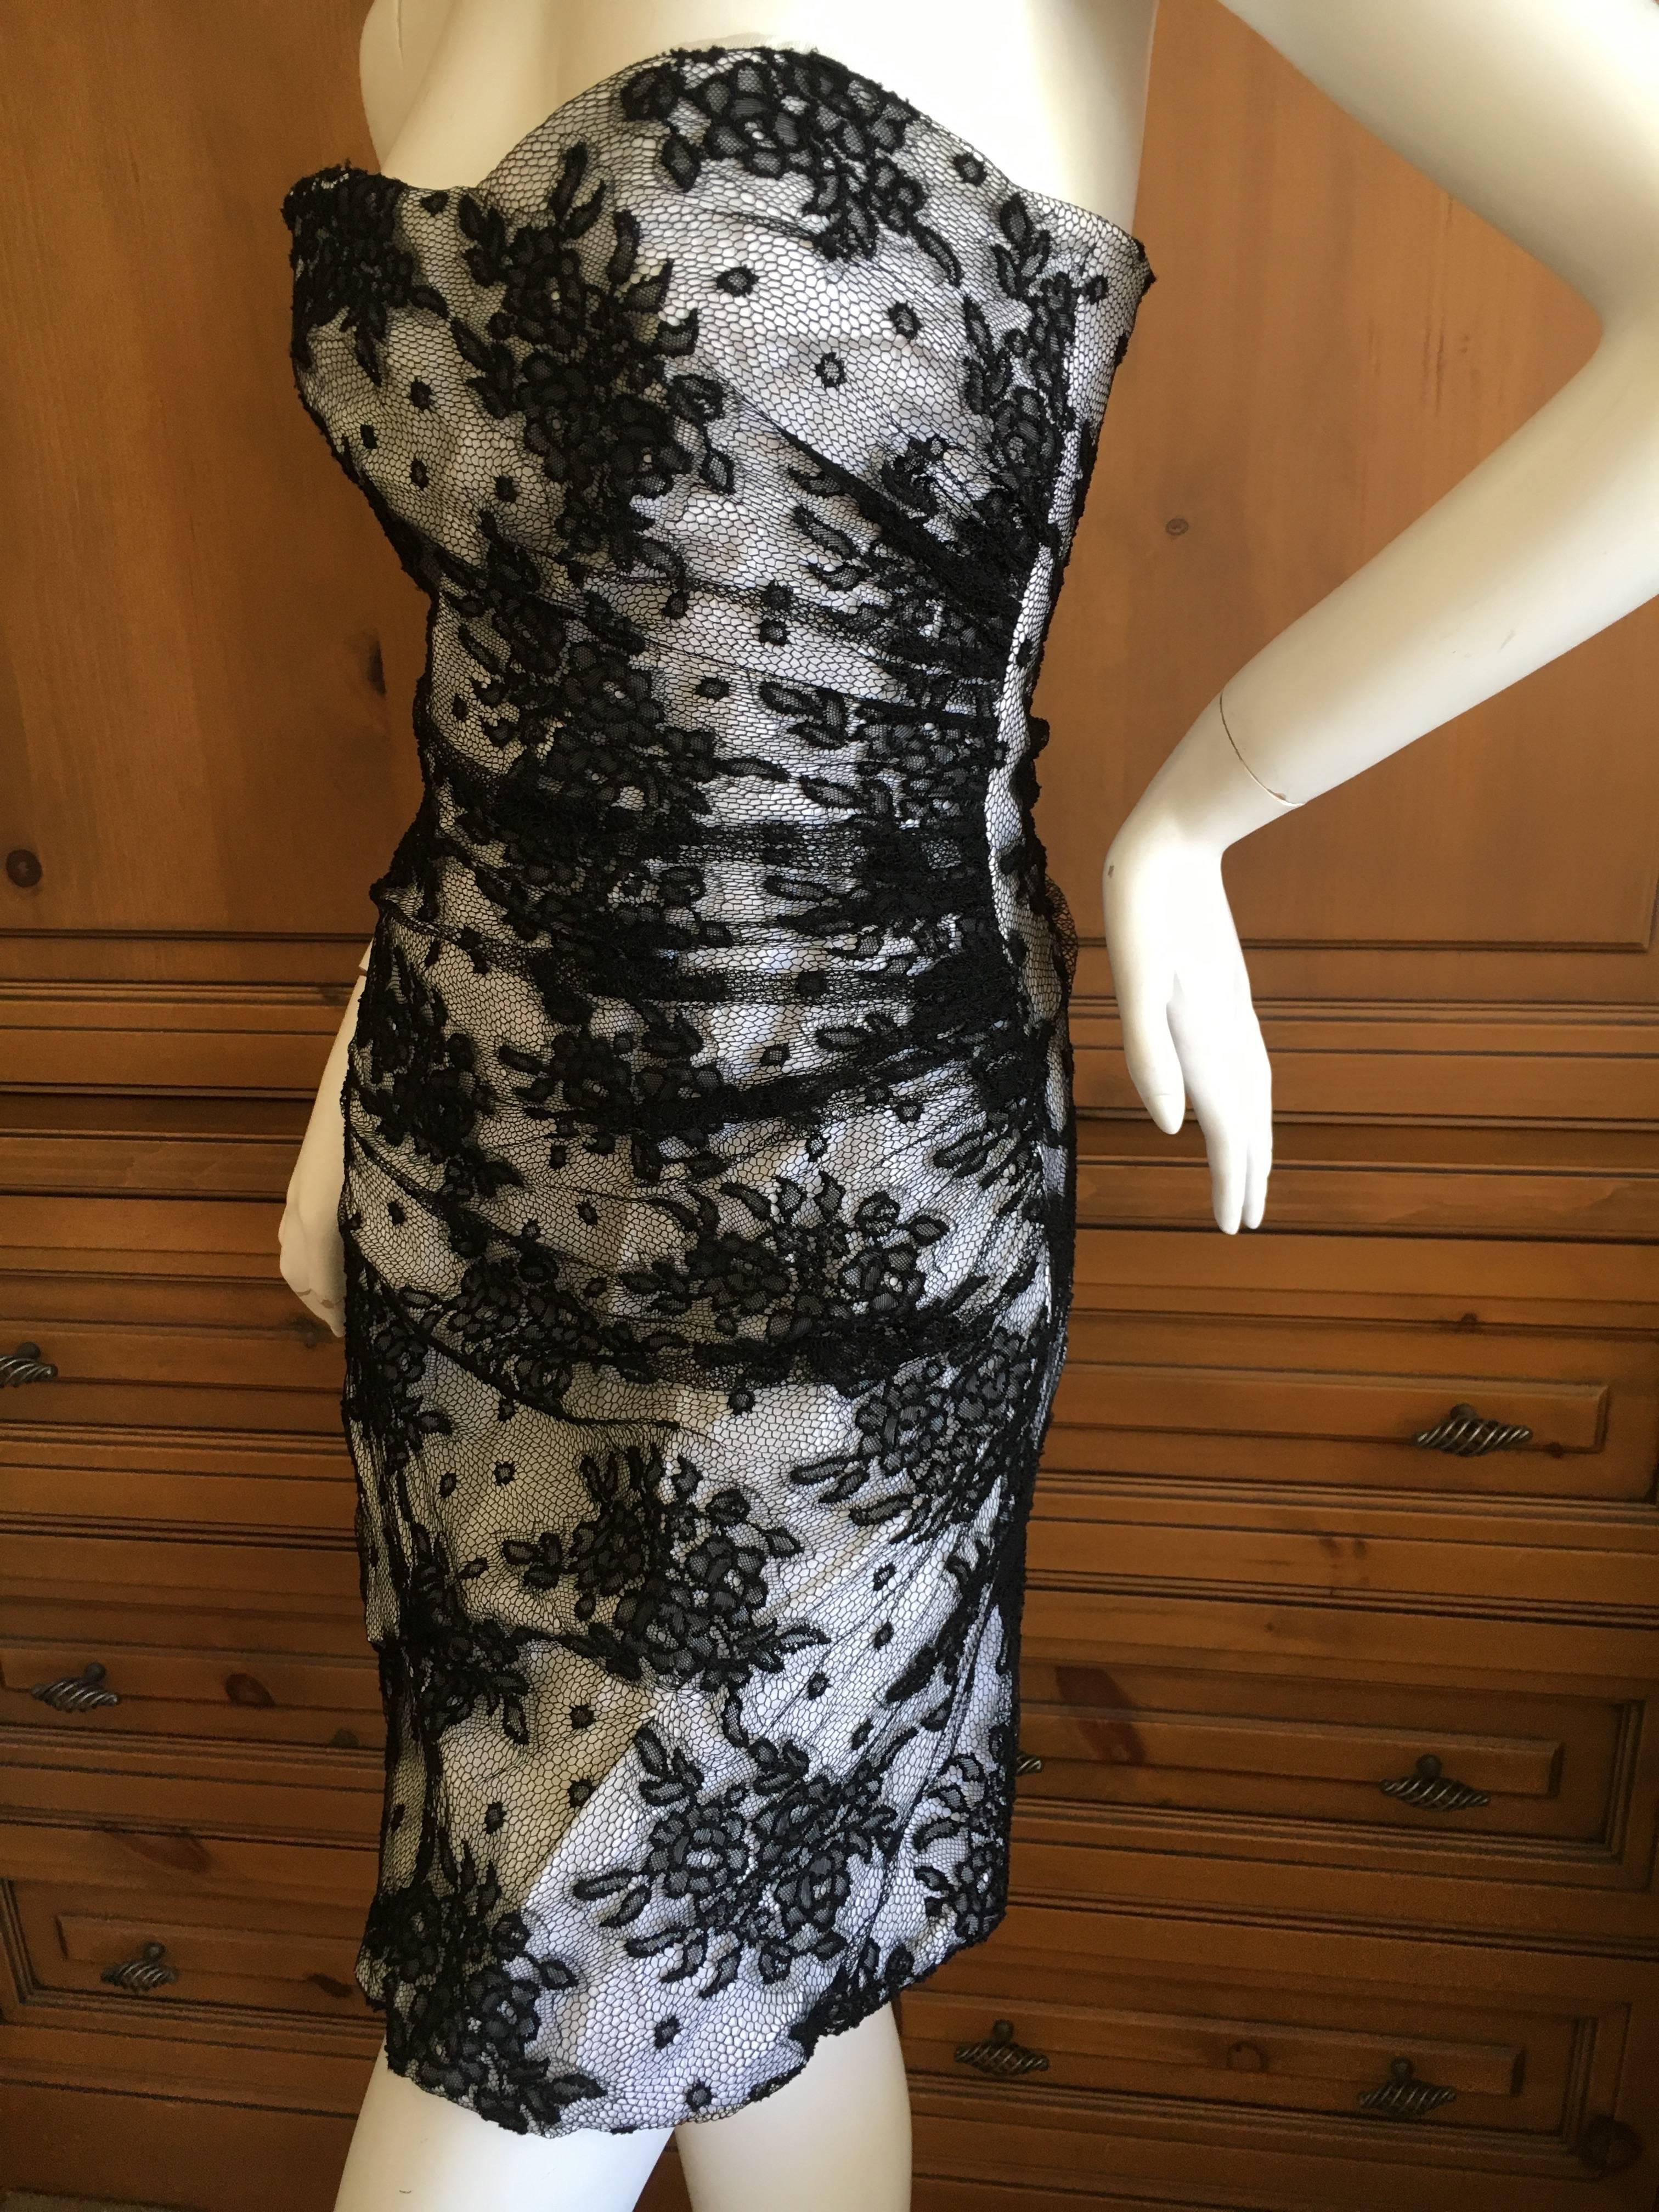 D&G Dolce & Gabbana Vintage Lace Overlay Strapless Cocktail Dress In Excellent Condition For Sale In Cloverdale, CA